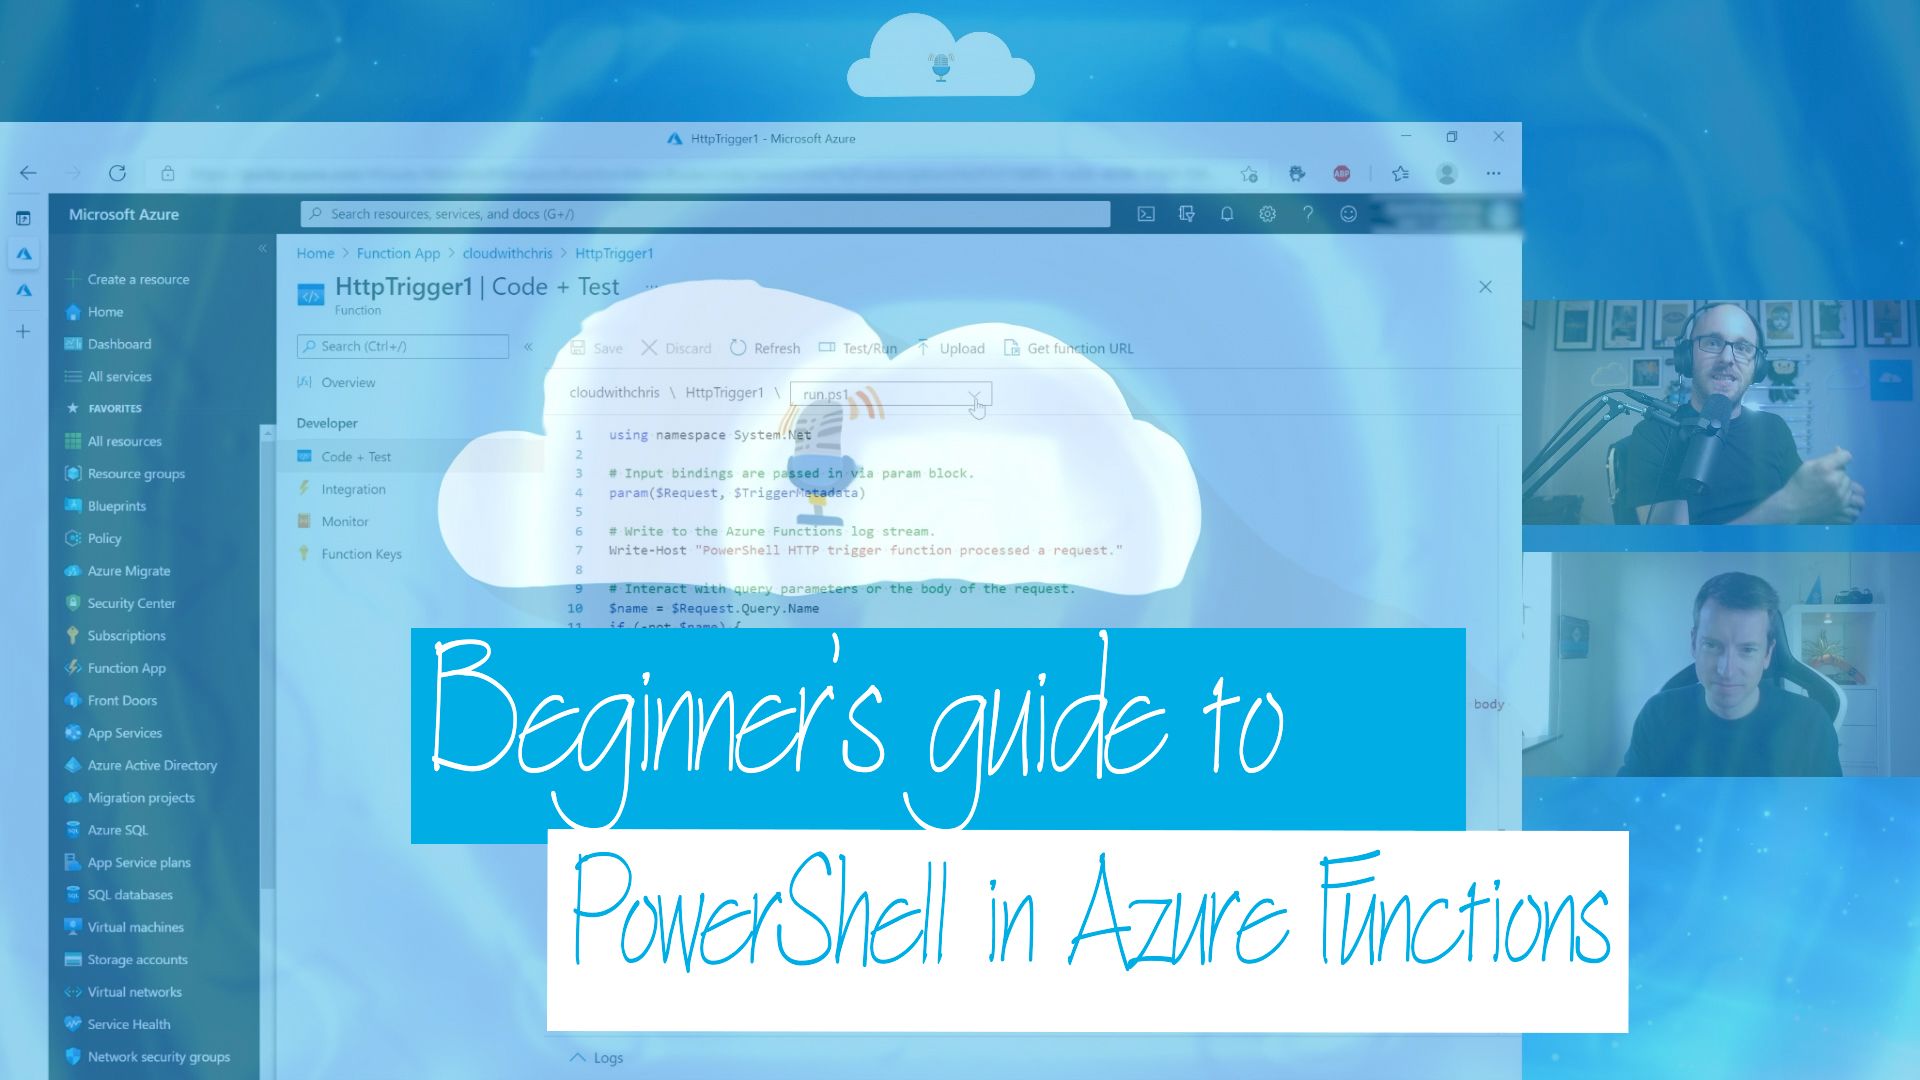 Cloud Drops - Beginners guide to PowerShell in Azure Functions